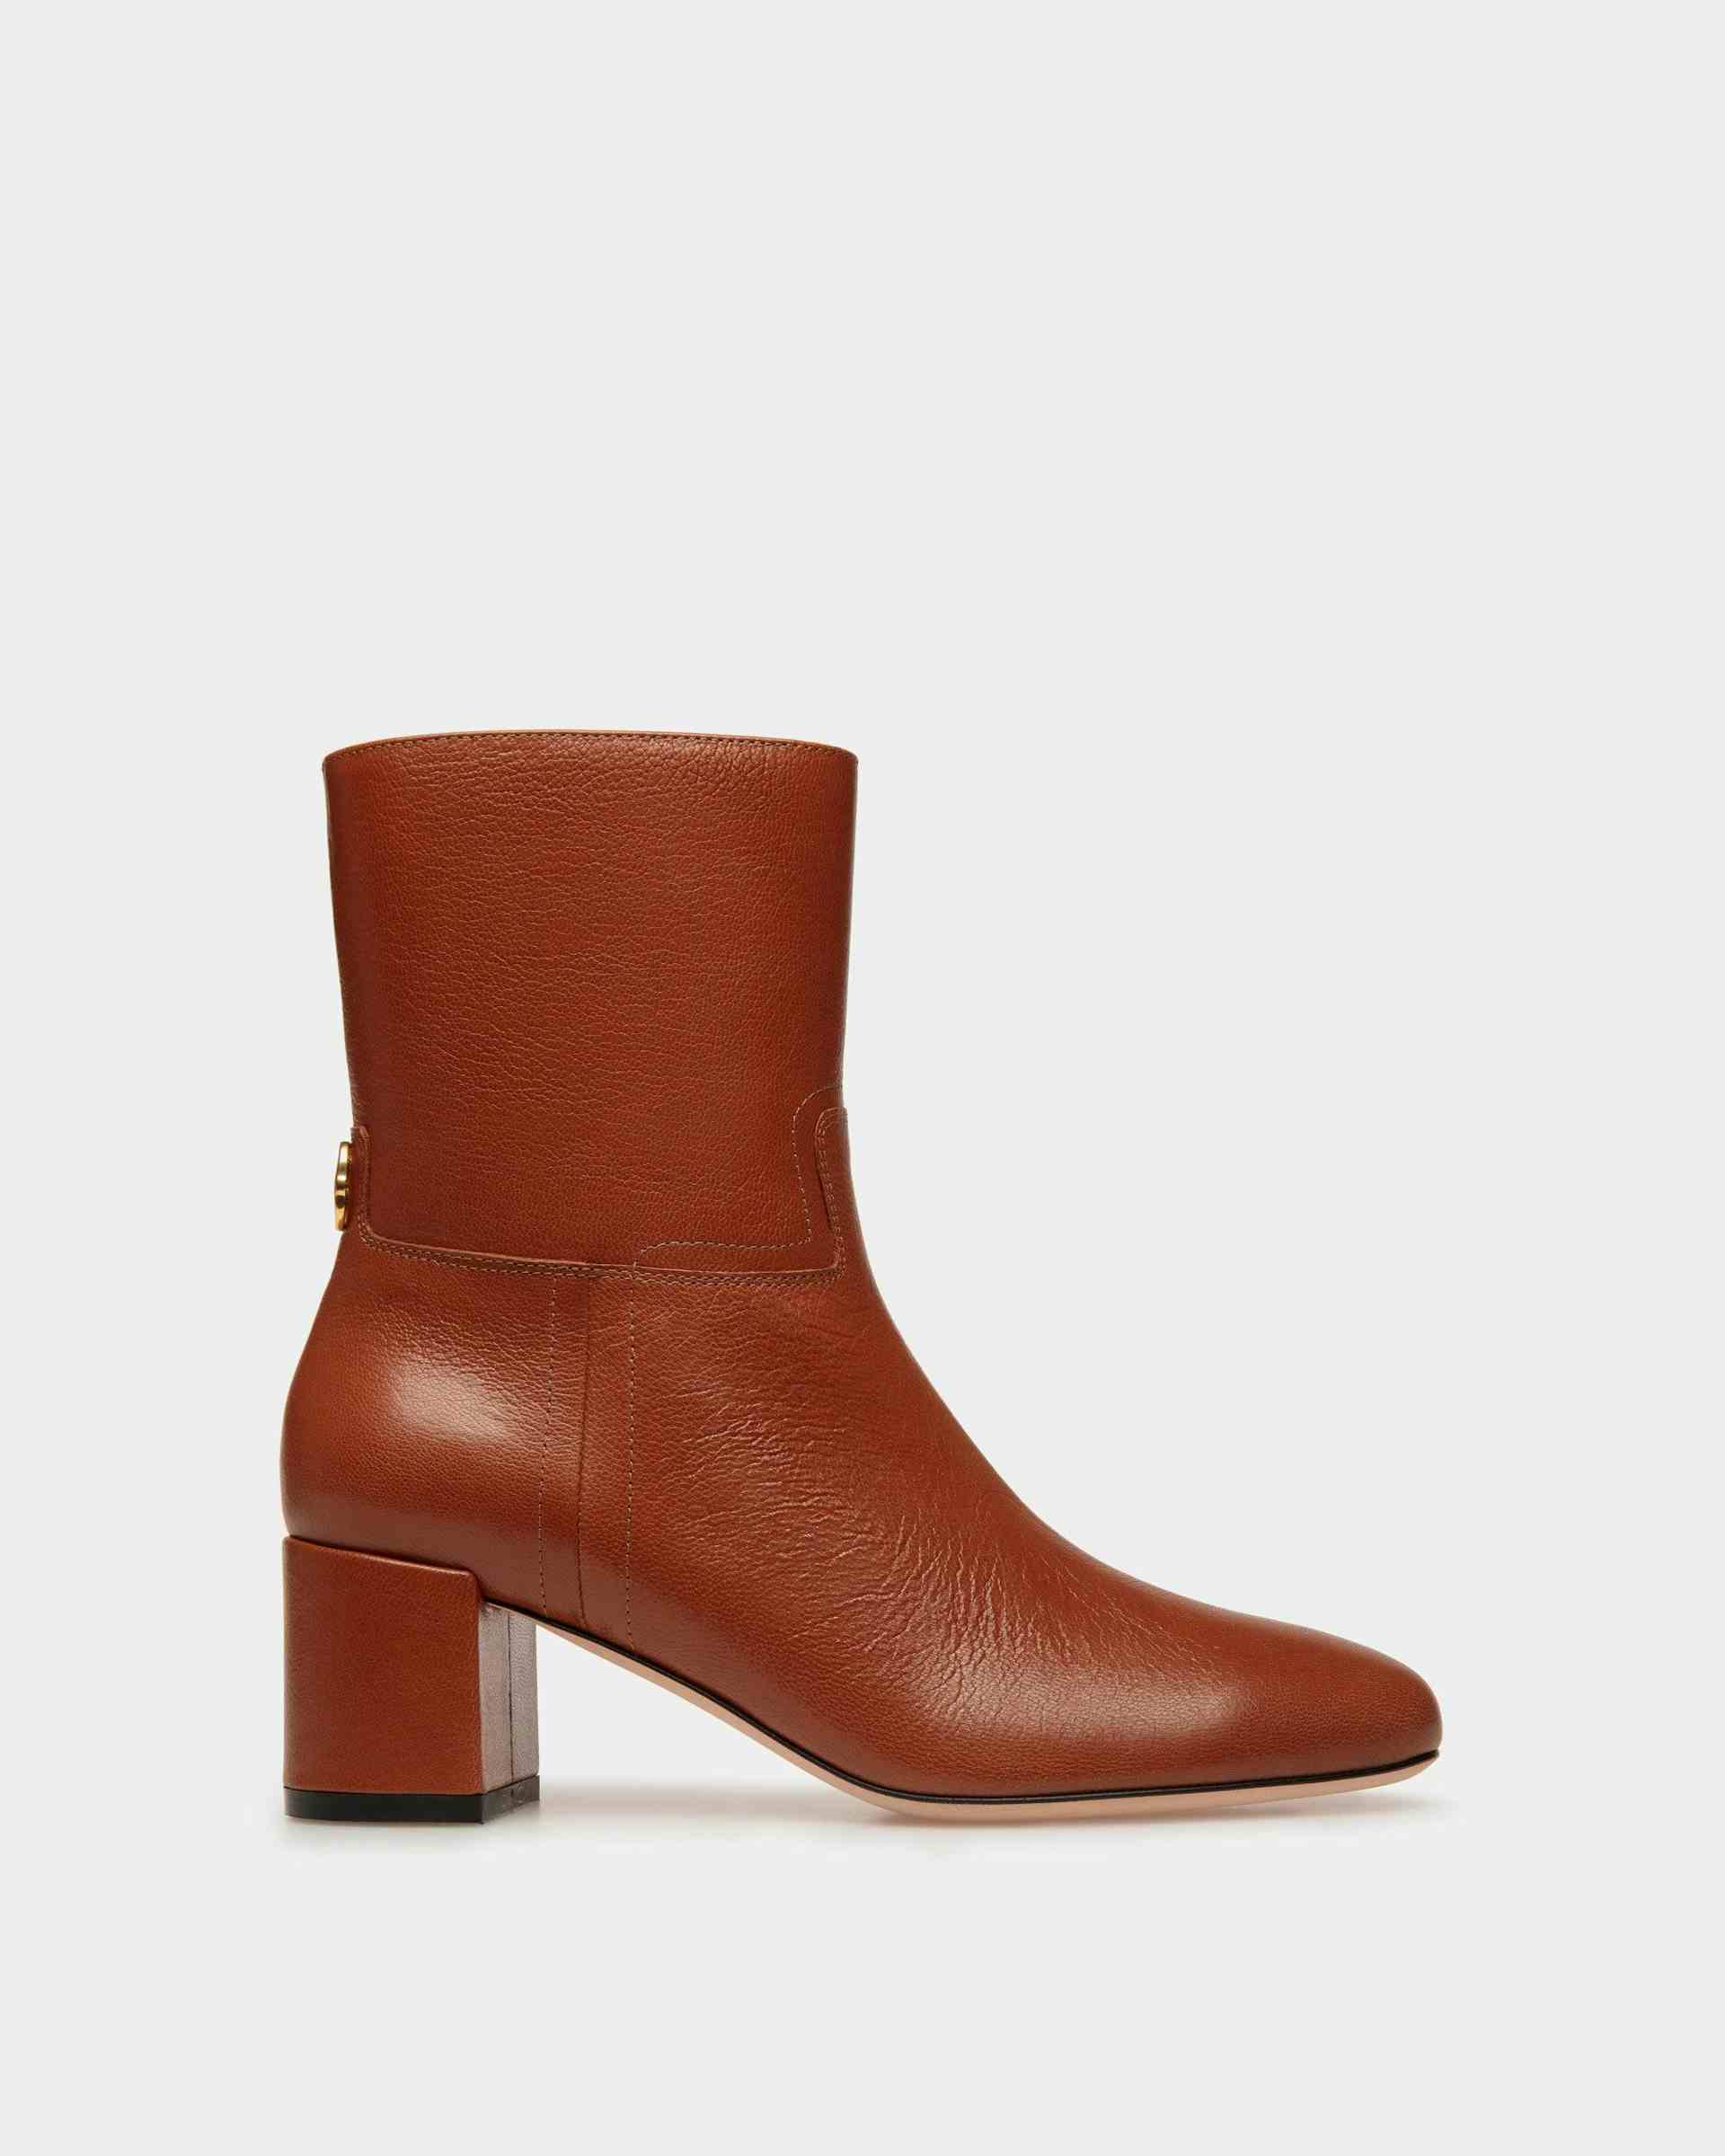 Daily Emblem Booties In Brown Leather - Women's - Bally